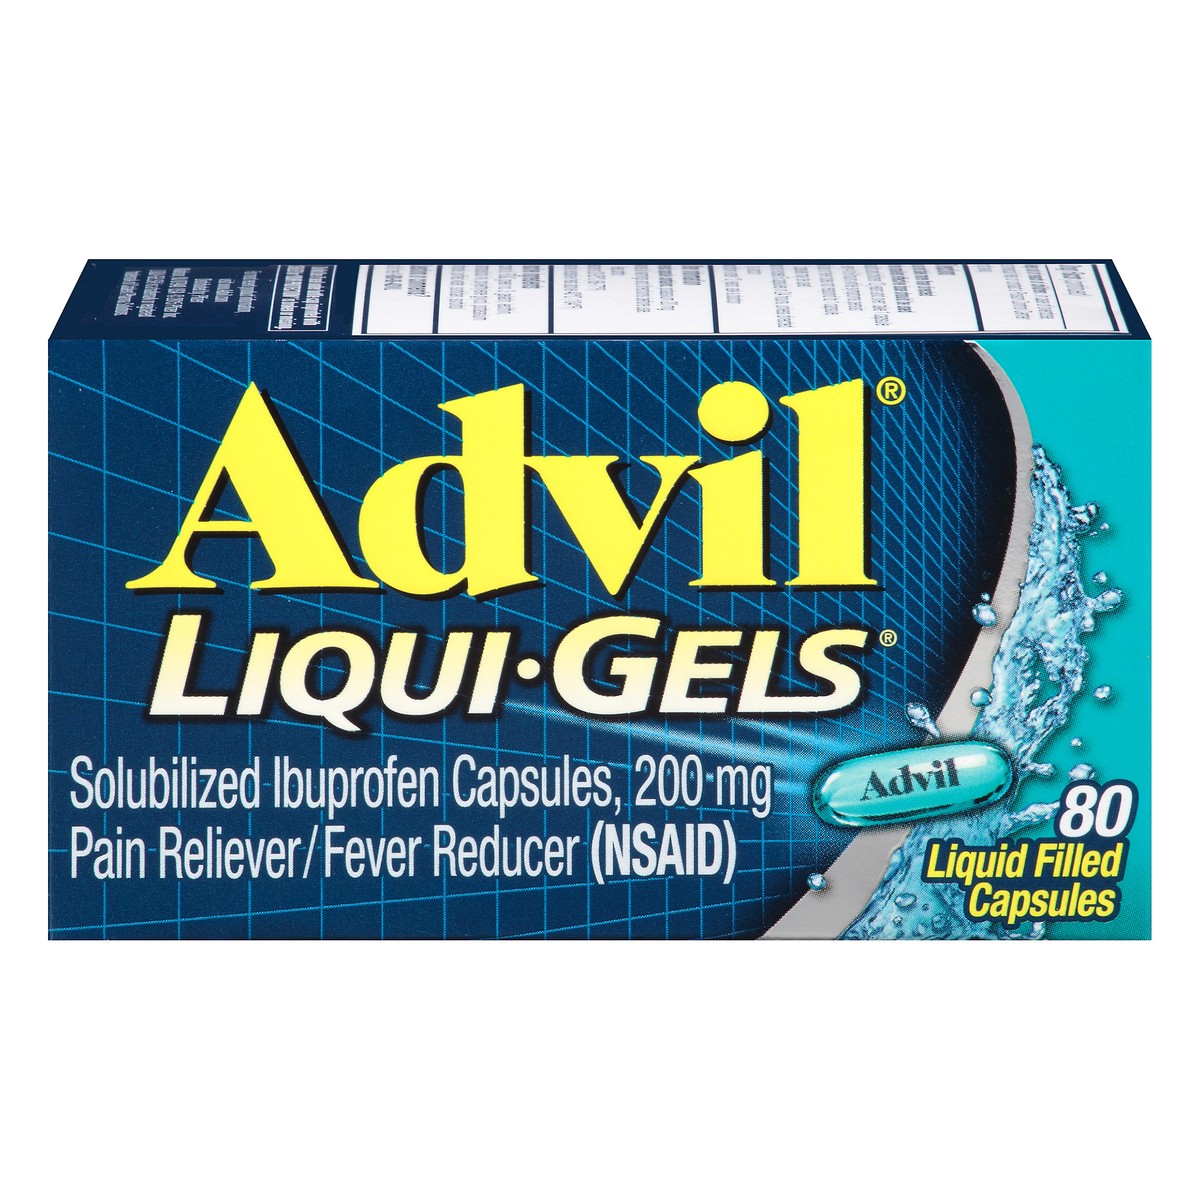 slide 1 of 8, Advil Liquid Filled Capsules 200 mg Pain Reliever/Fever Reducer 80 ea, 80 ct